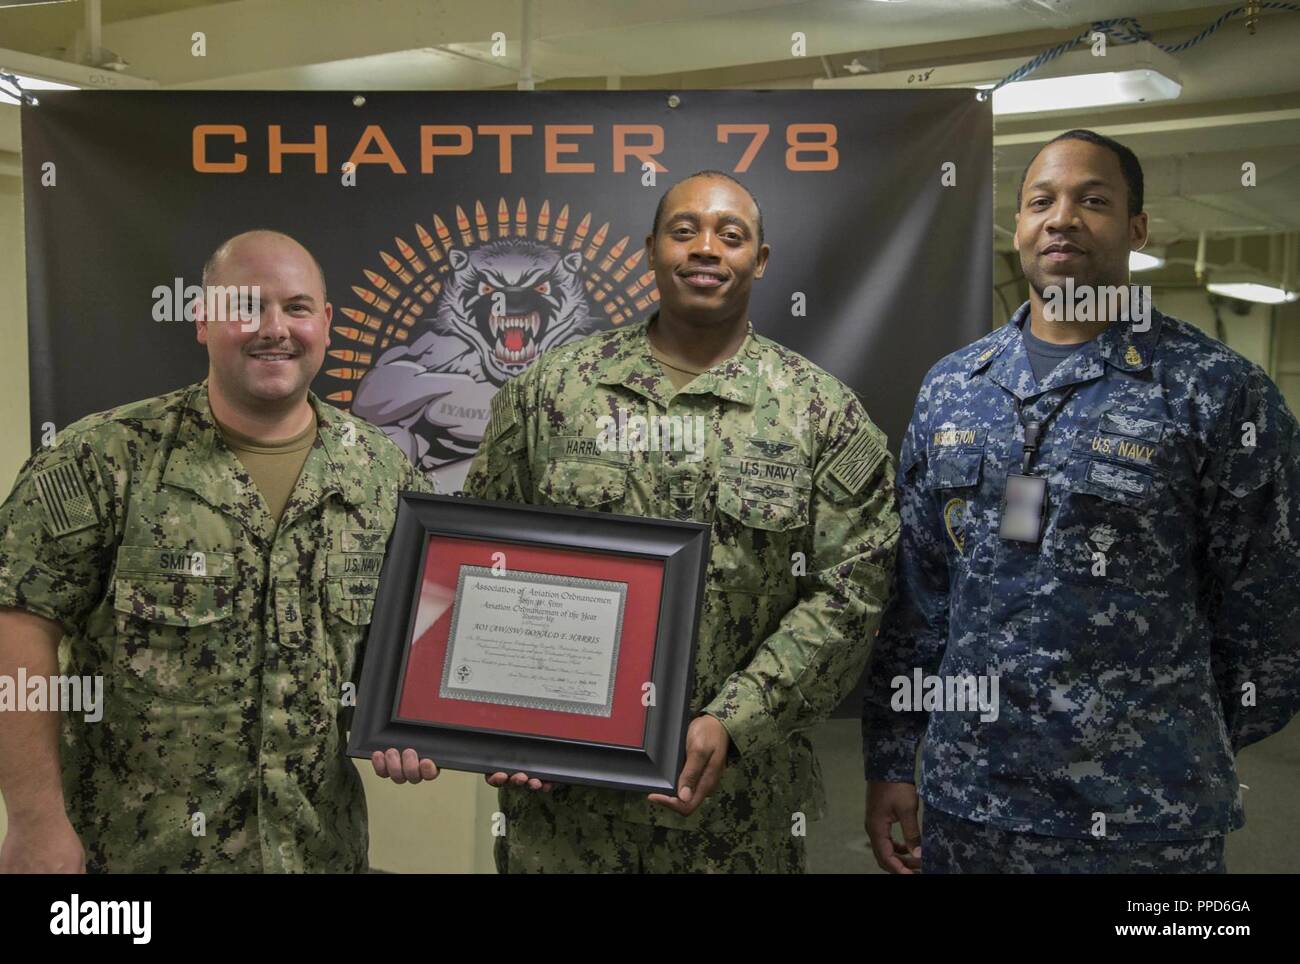 NEWPORT NEWS, Va. (Aug. 23, 2018) Aviation Ordnanceman 1st Class Donald Harris, from Tallahassee, Fla., assigned to USS Gerald R. Ford's (CVN 78) weapons department, center, poses for a group photo after being awarded Aviation Ordnanceman of the Year by Capt. John J. Cummings, Ford's commanding officer. Harris will be promoted to chief petty officer next month. Stock Photo